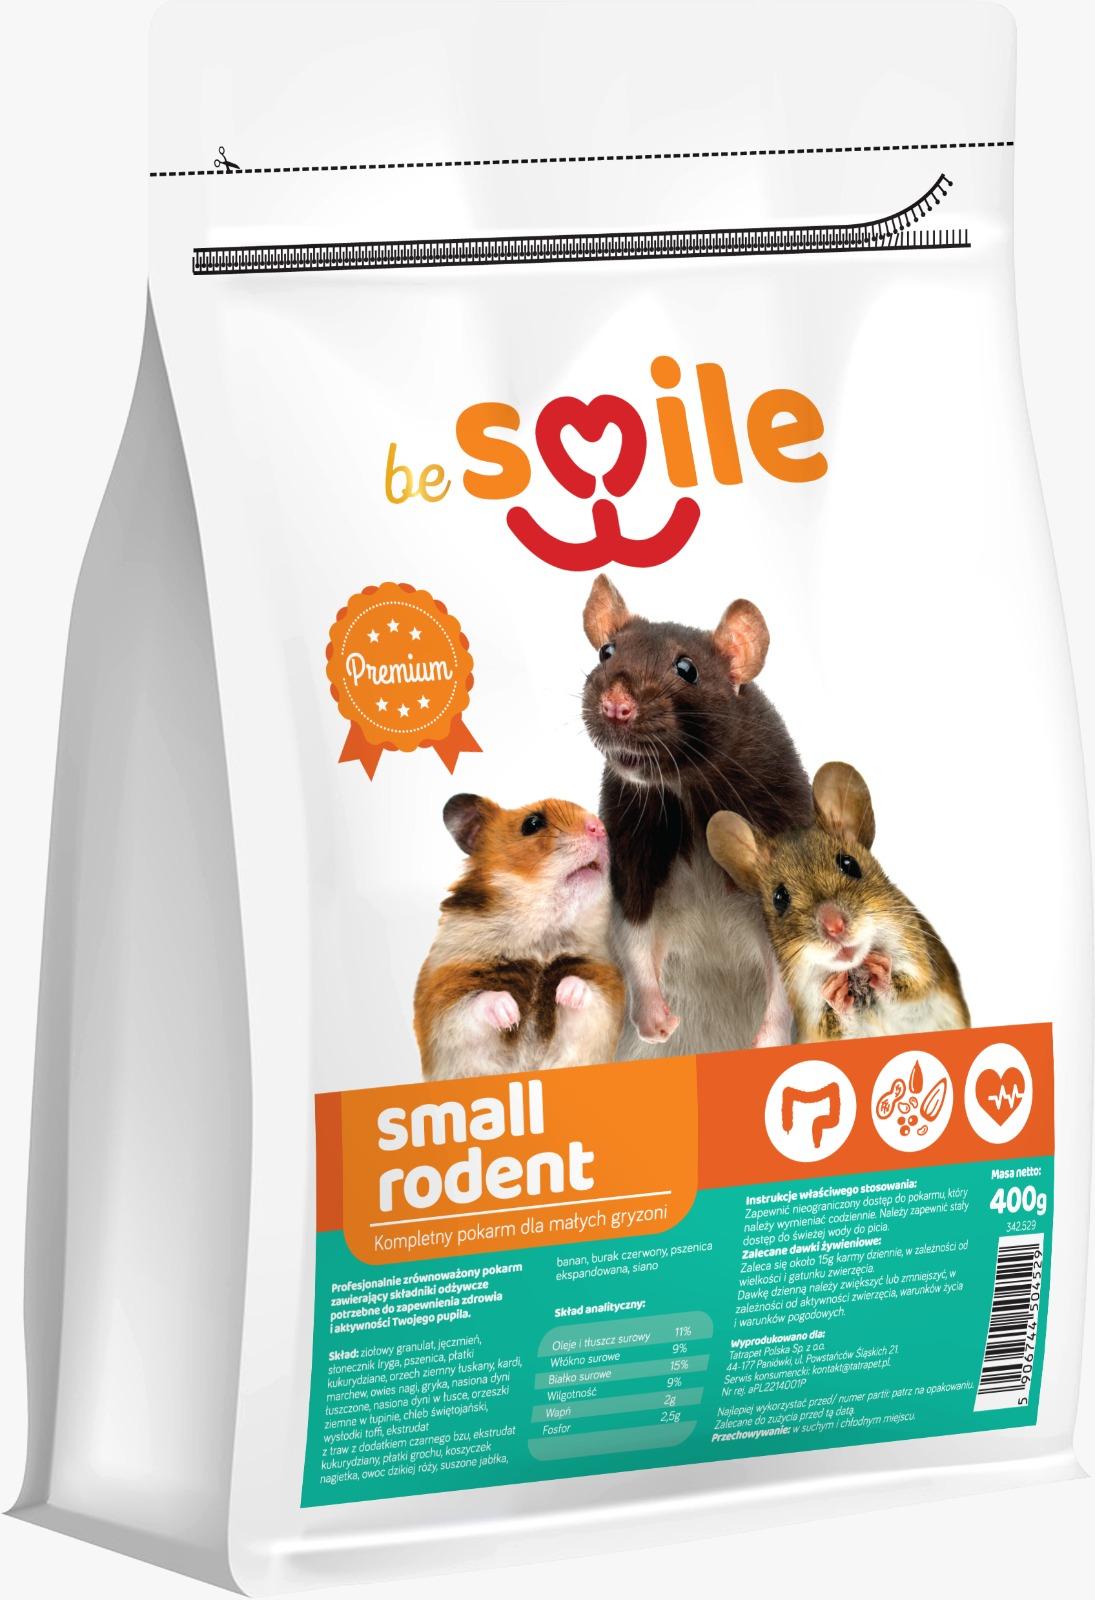 beSMILE RODENT food - Small Rodent 800g food for small rodents